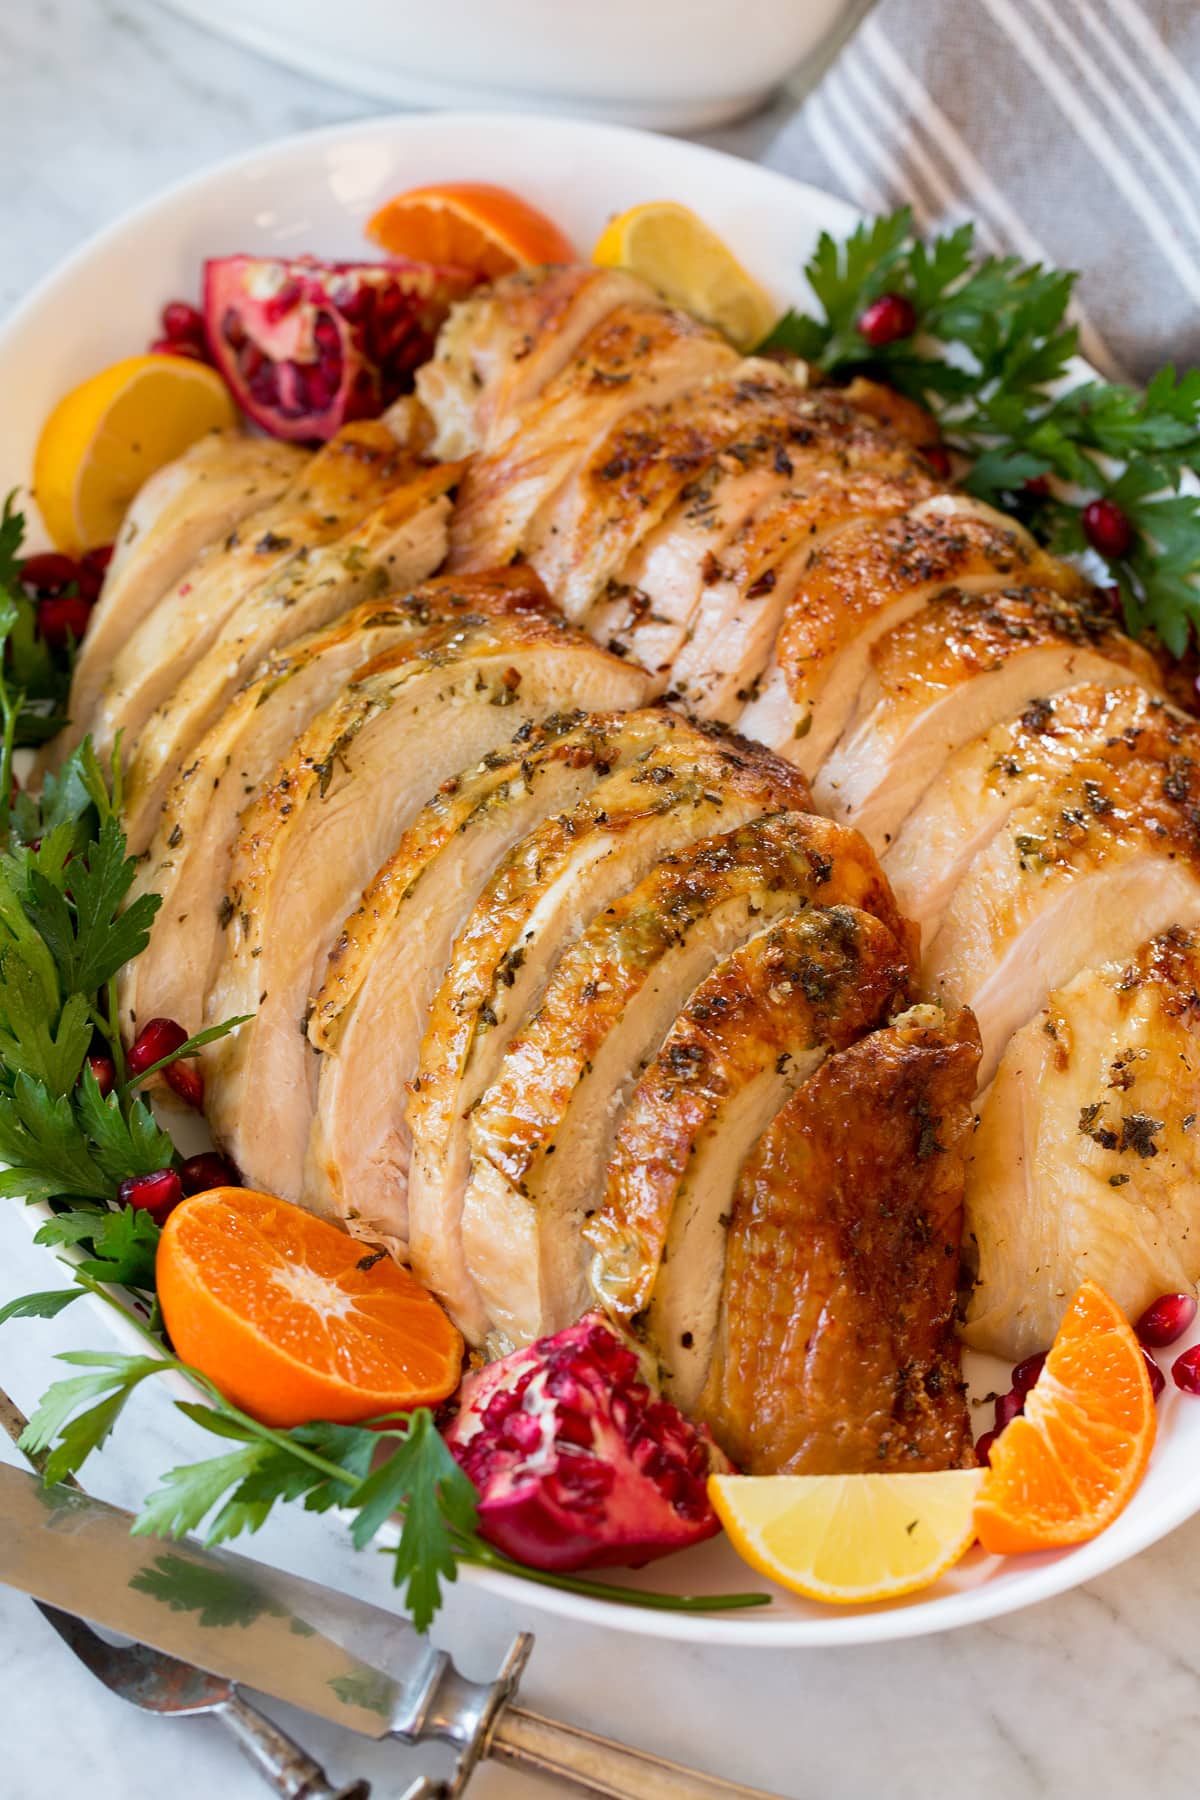 Roast Turkey Breast sliced on a serving platter with sides of fruit.